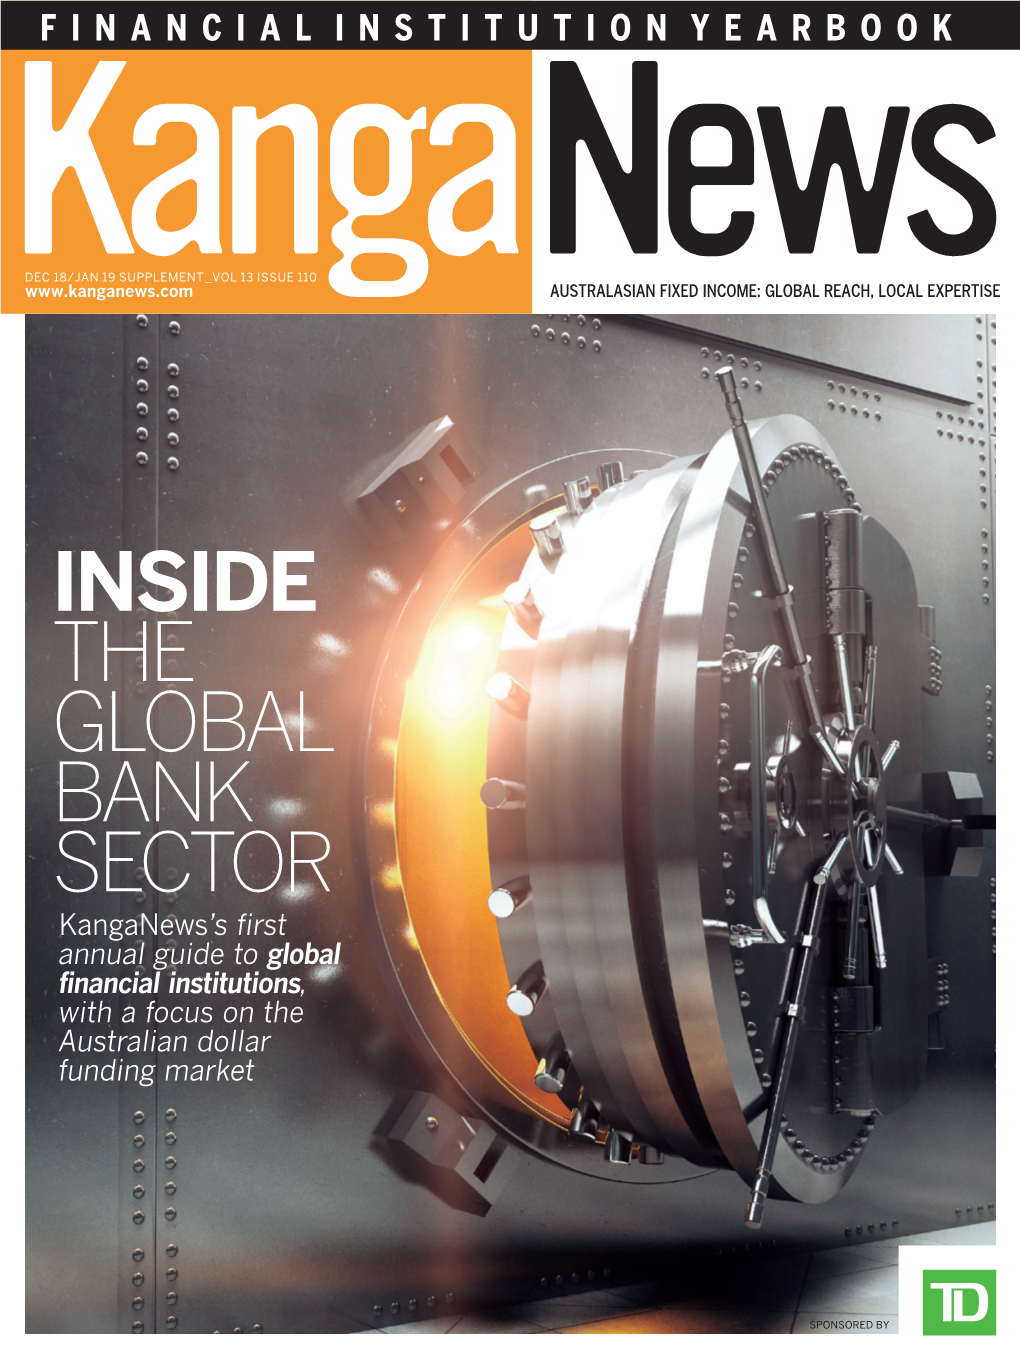 INSIDE the GLOBAL BANK SECTOR Kanganews’S First Annual Guide to Global Financial Institutions, with a Focus on the Australian Dollar Funding Market